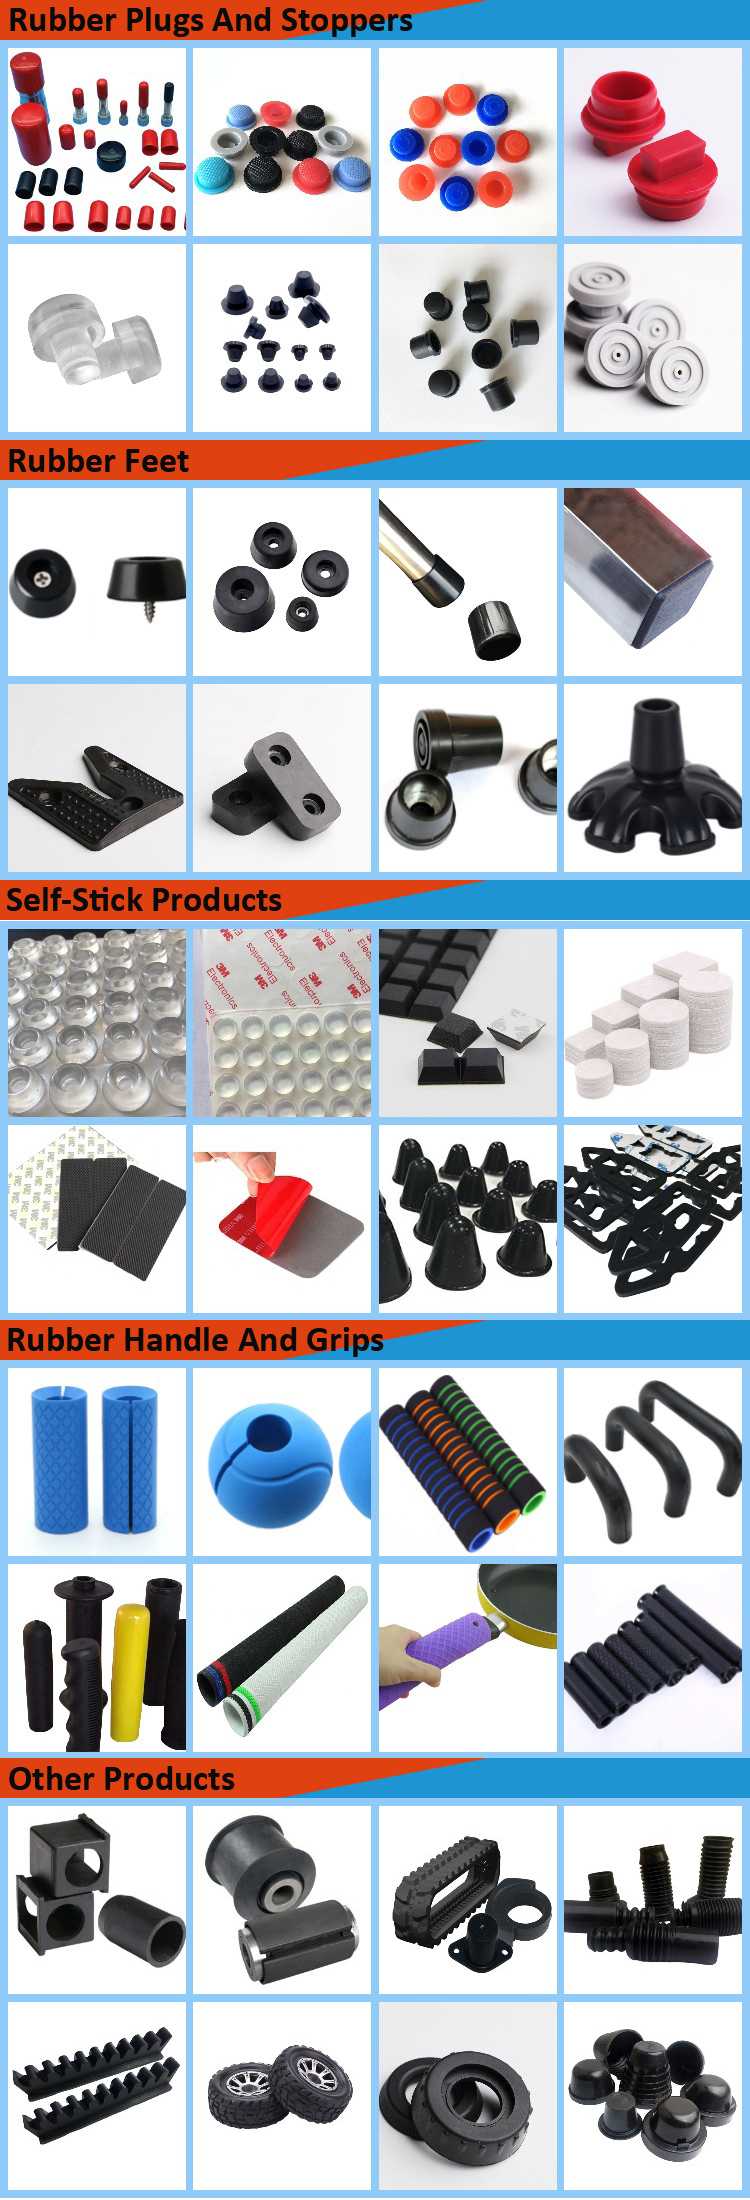 Rubber Products II.jpg